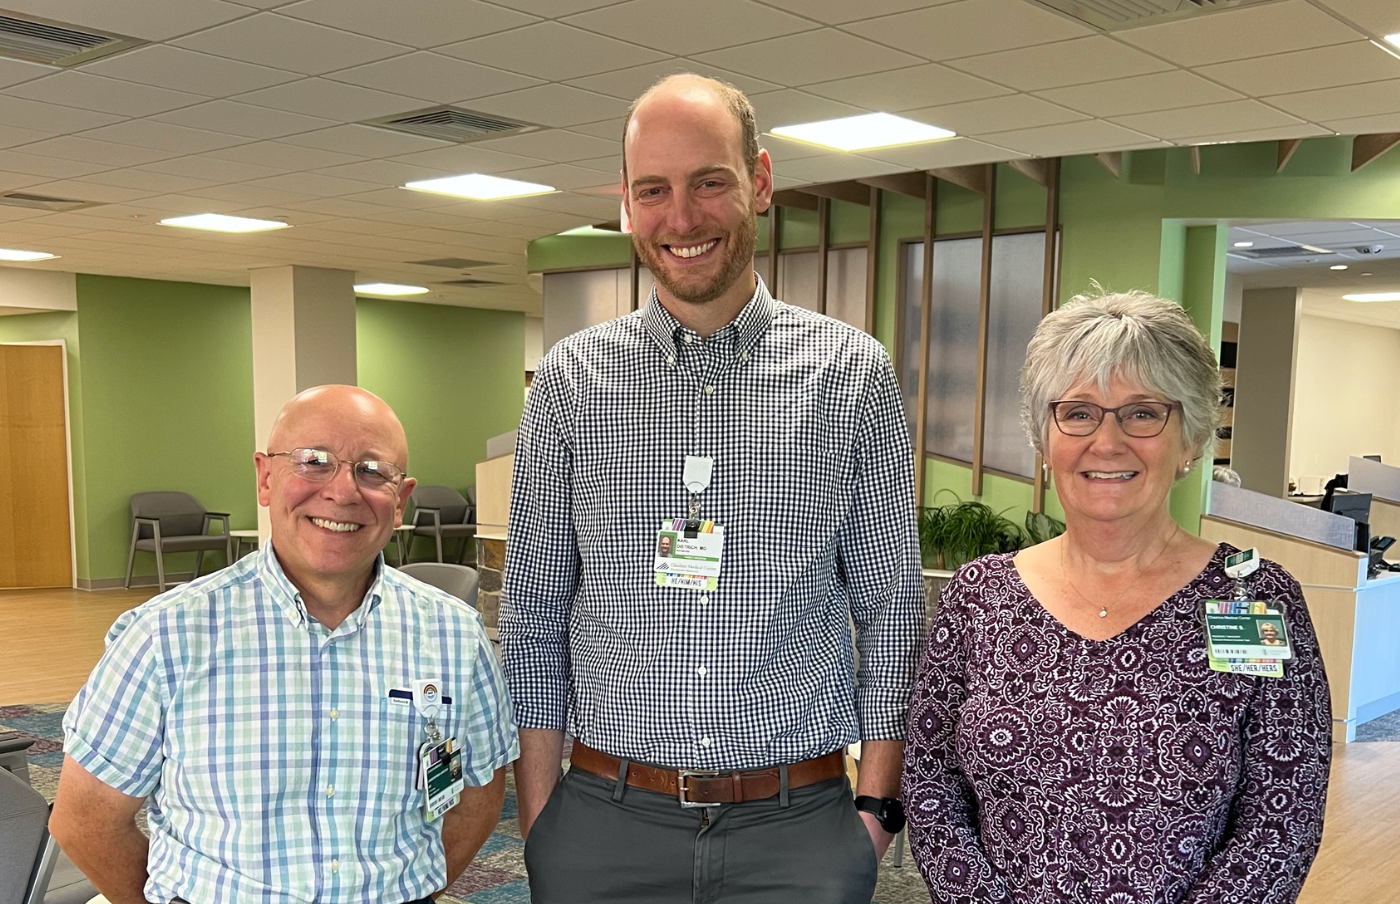 Director of Graduate Medical Education and Family Medicine Residency Development Chris LaRocca, MD, Program Director Karl Dietrich, MD, MPH, and Program Coordinator Christine Symonds gather in Family &Community Care's reception area on Oct. 9, 2023, opening day. 